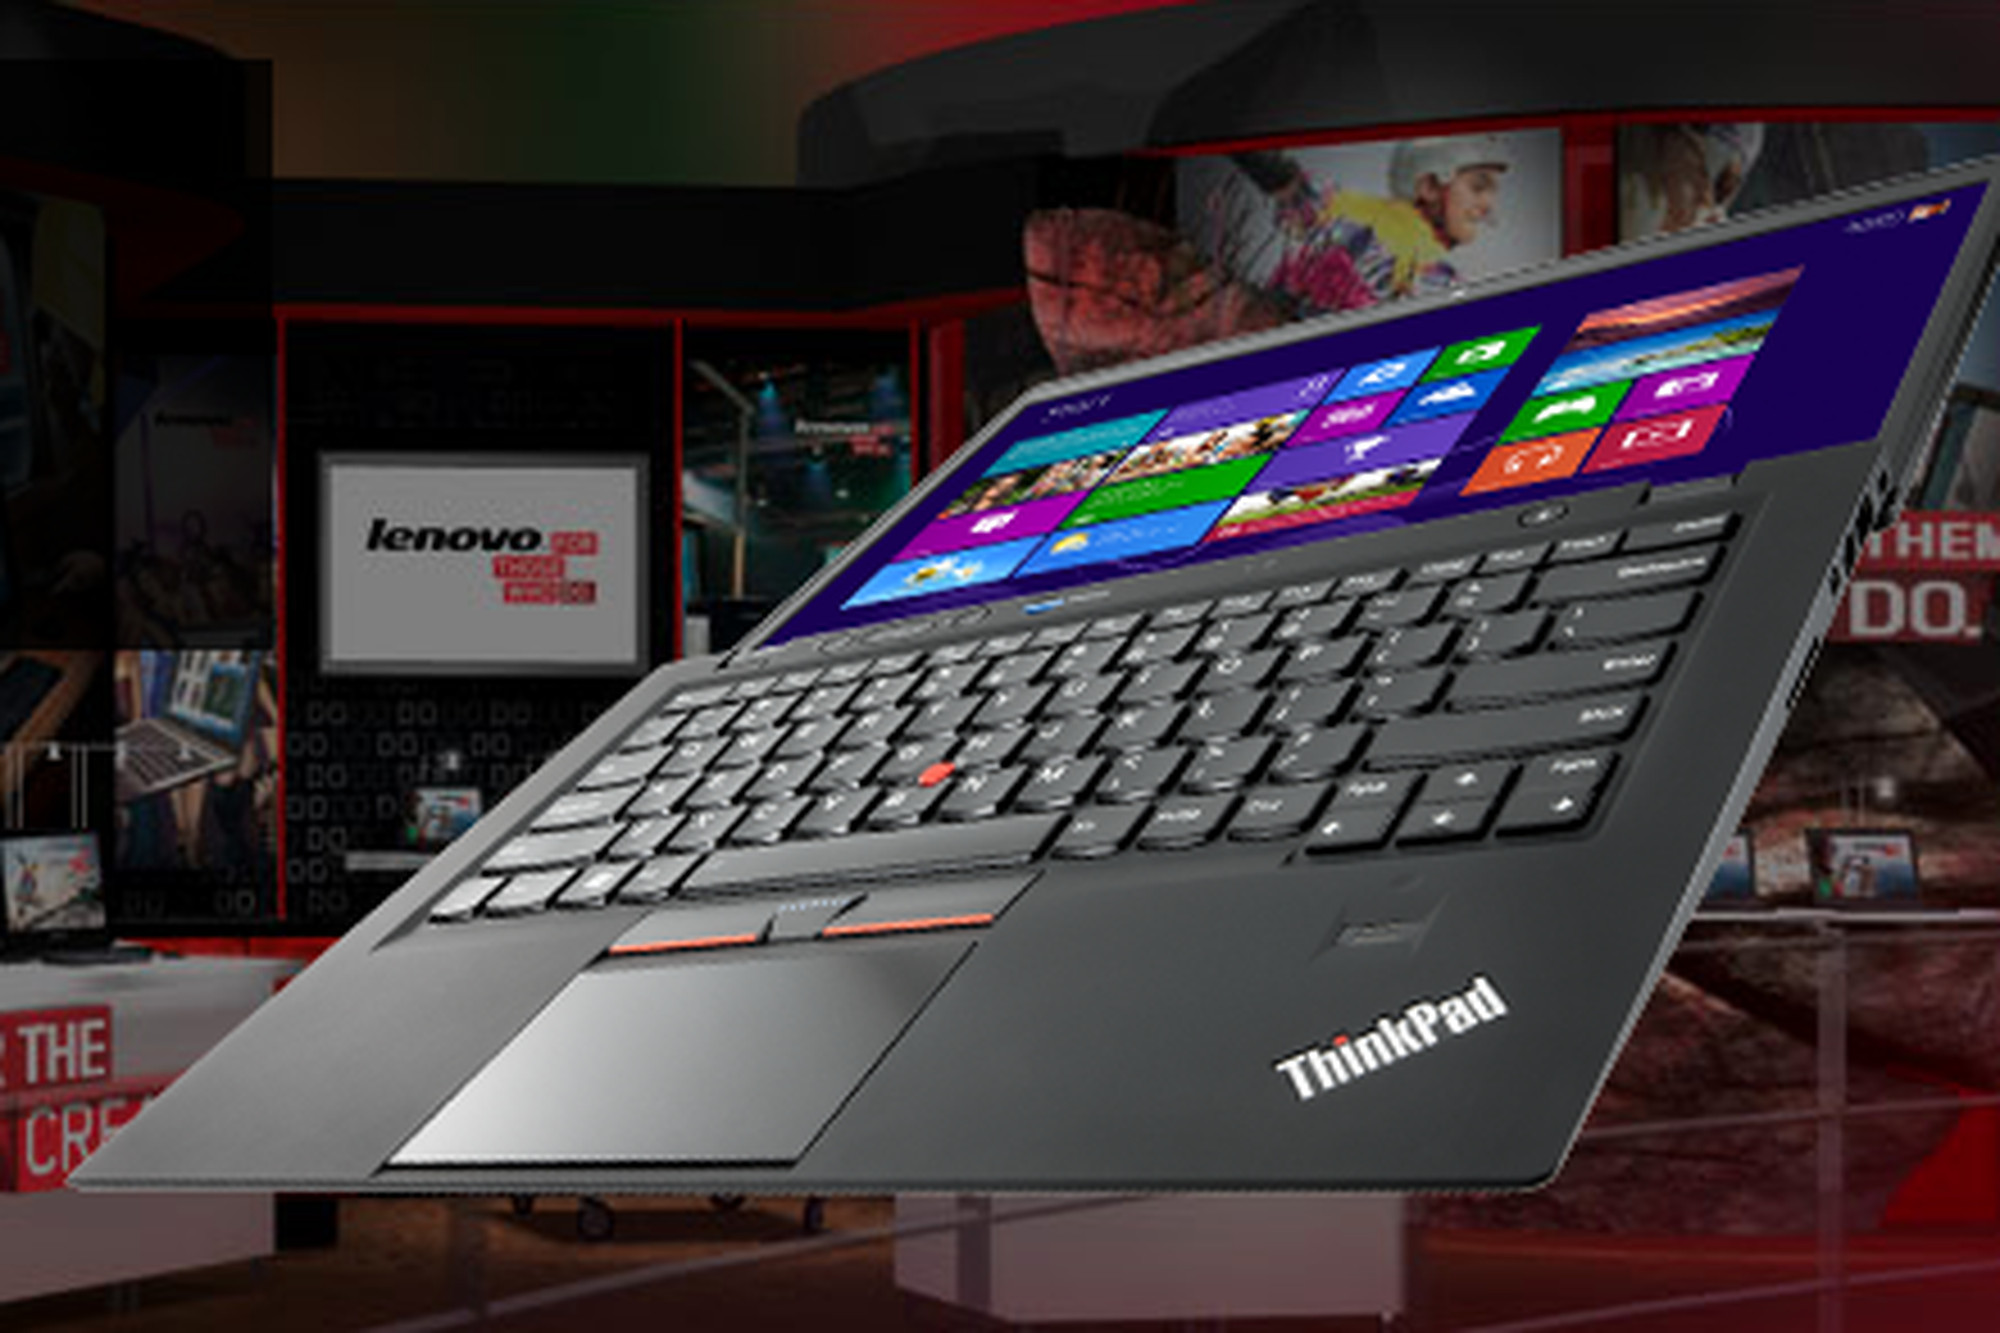 Lenovo website reveals ThinkPad X1 Carbon Touch ultrabook for Windows 8 -  The Verge